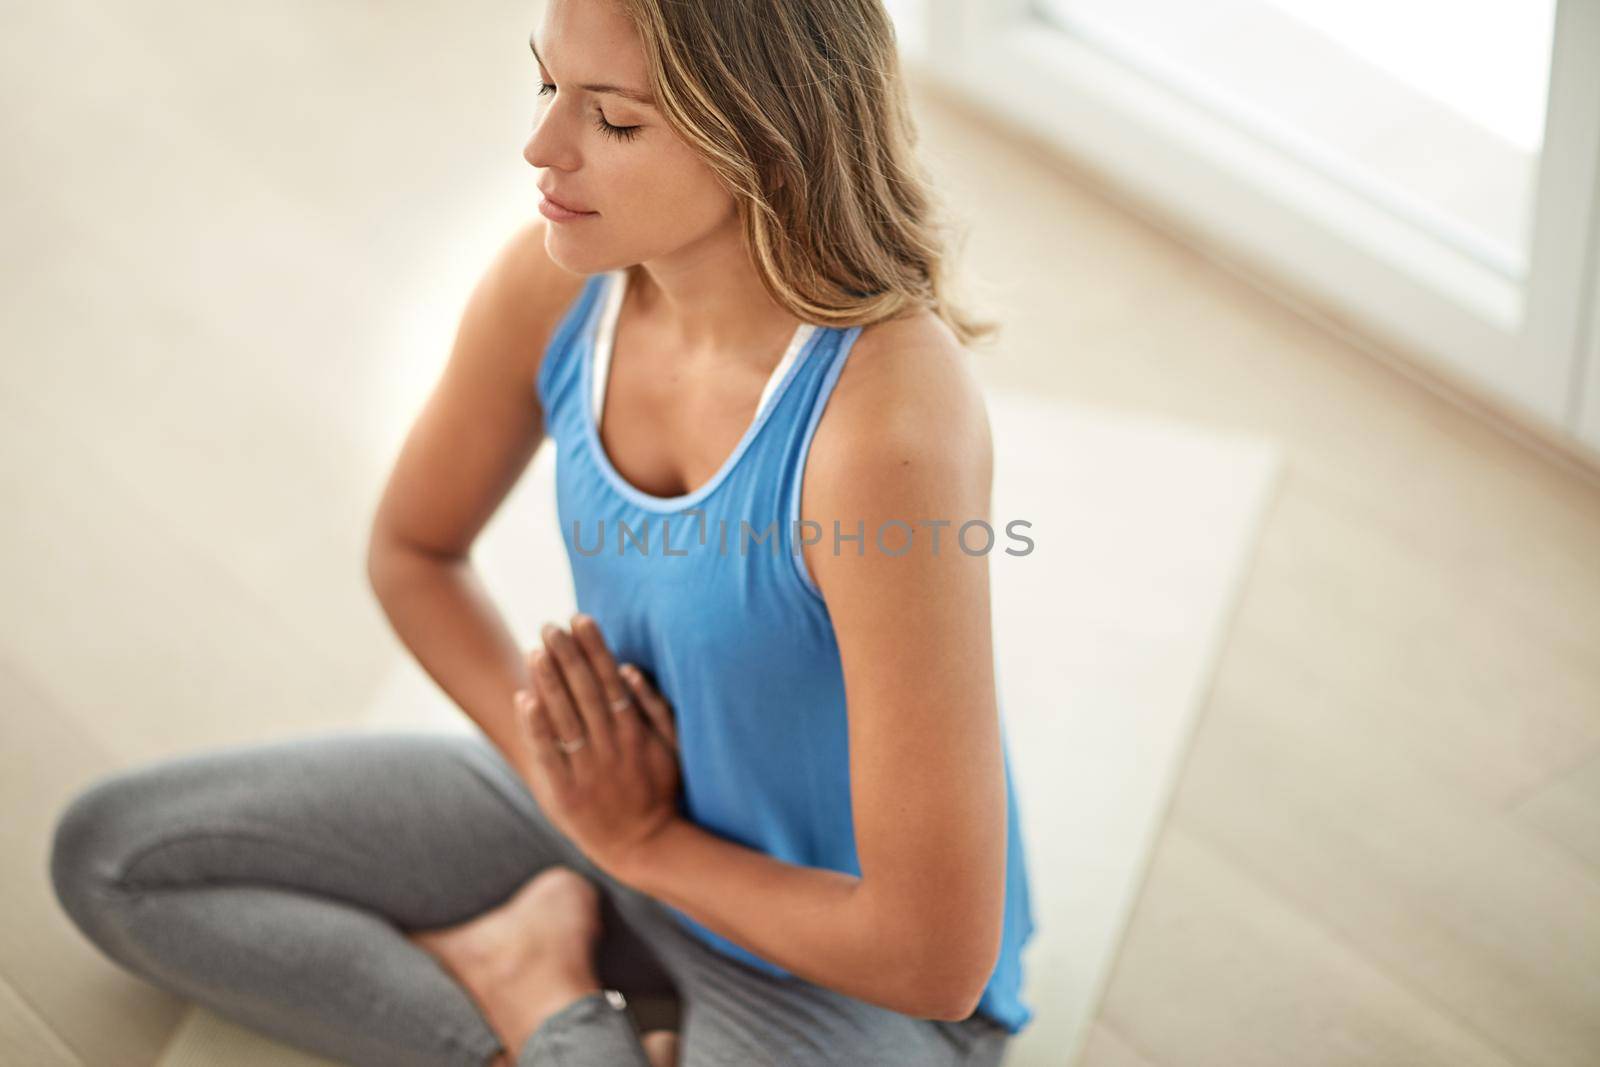 Meditation is part of her lifestyle. a young woman meditating at home